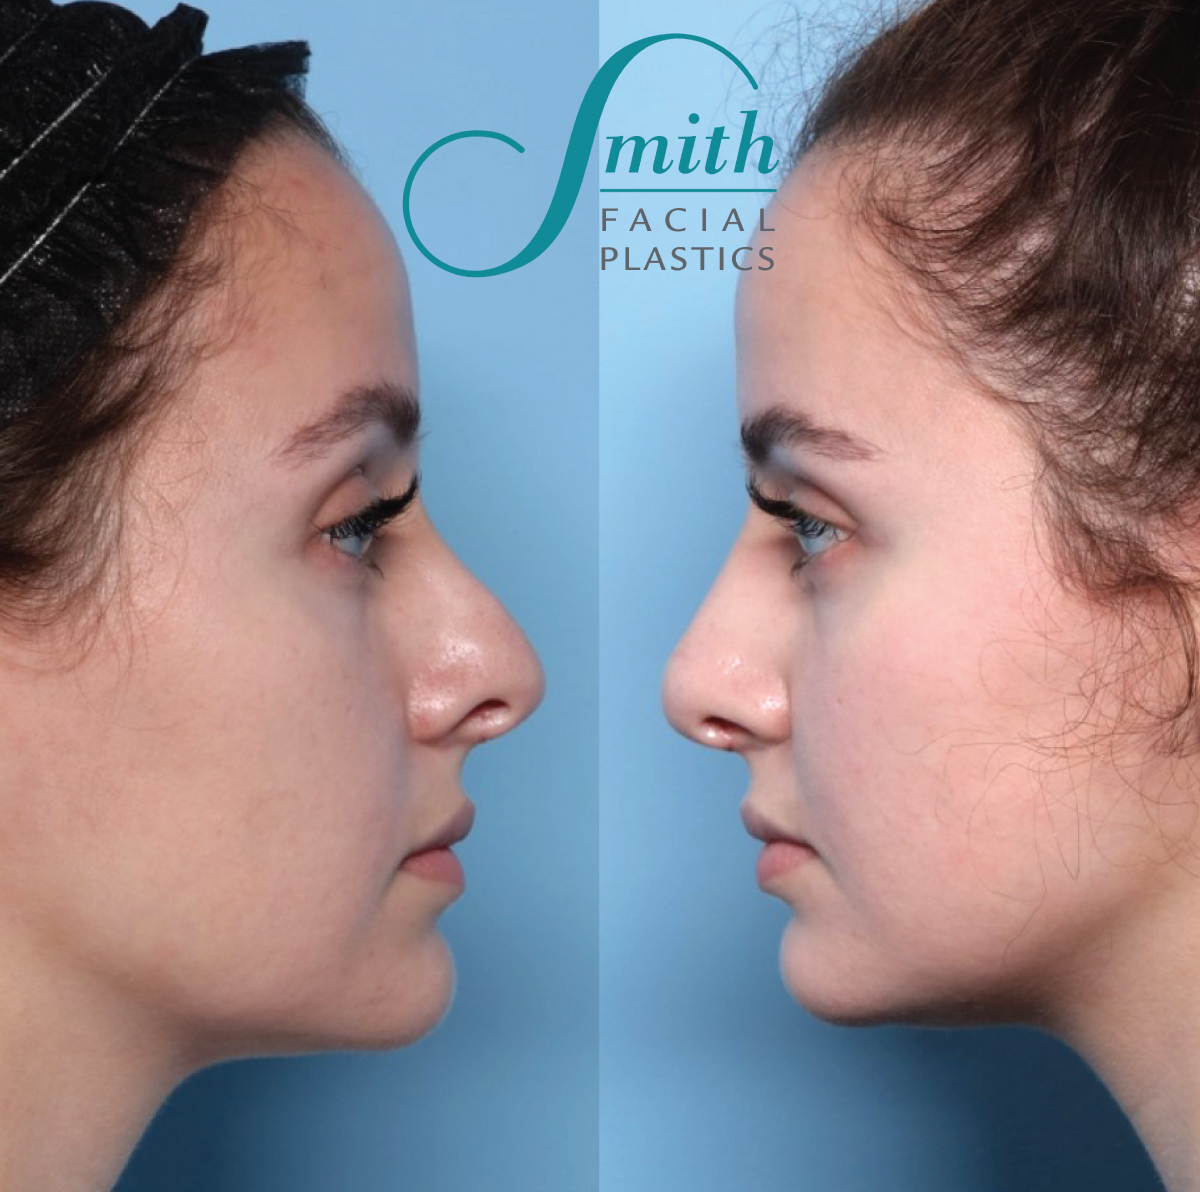 Revision Rhinoplasty Before and After Results in Columbus by Smith Facial Plastics